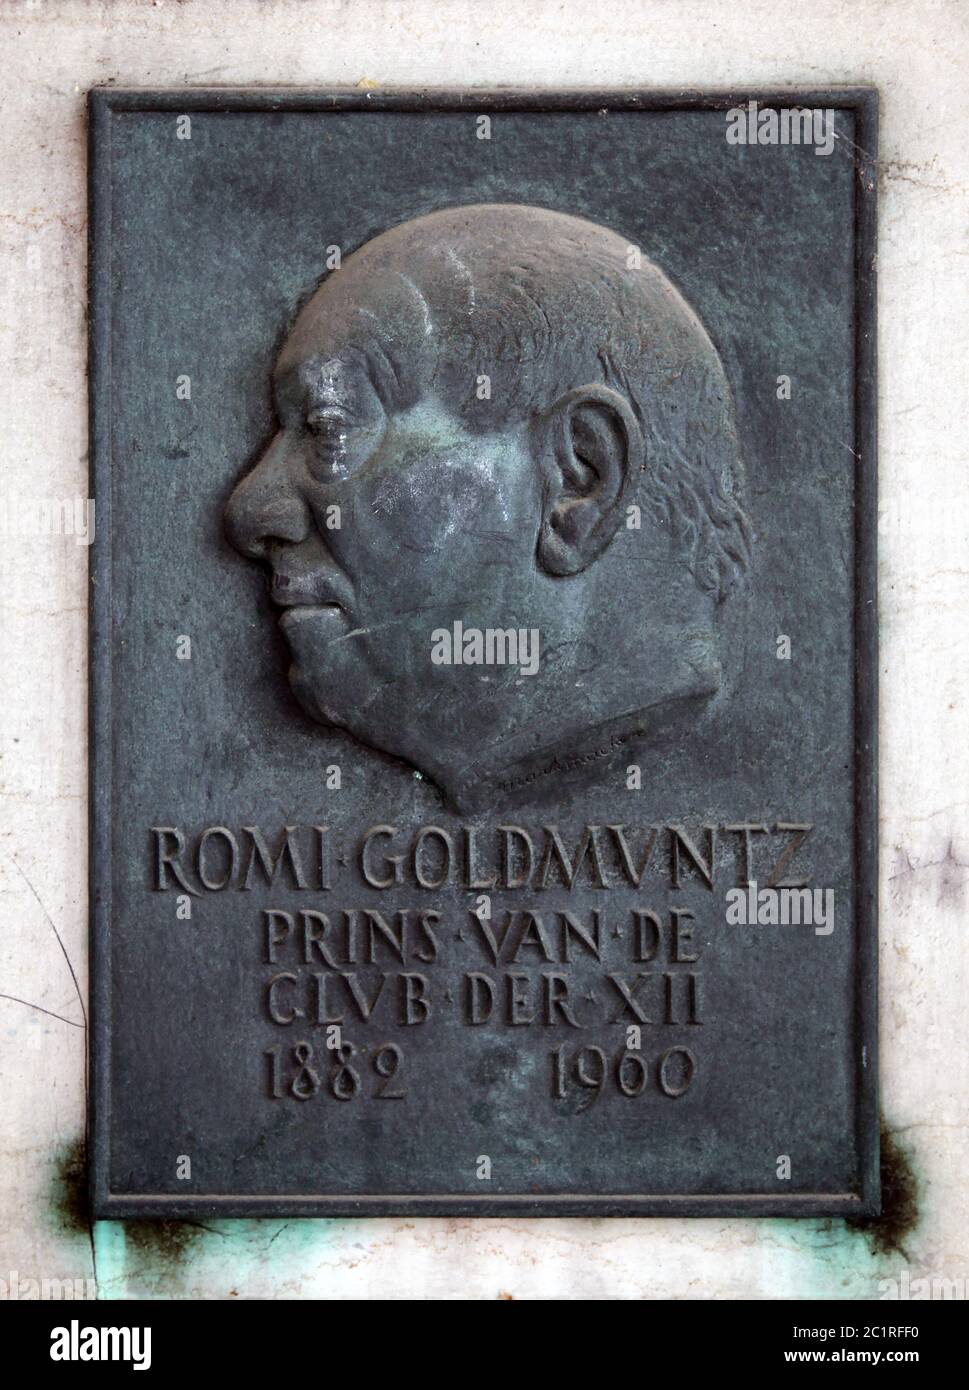 Romi Goldmuntz (Kraków, 1882-1960) Belgian businessman who played an essential role in the diamond business in Antwerp. In 1920, his diamond company employed about 600 workers.The Romi Goldmuntz Center and the Great Synagogue Romi Goldmuntz in Antwerp are named after him. Stock Photo